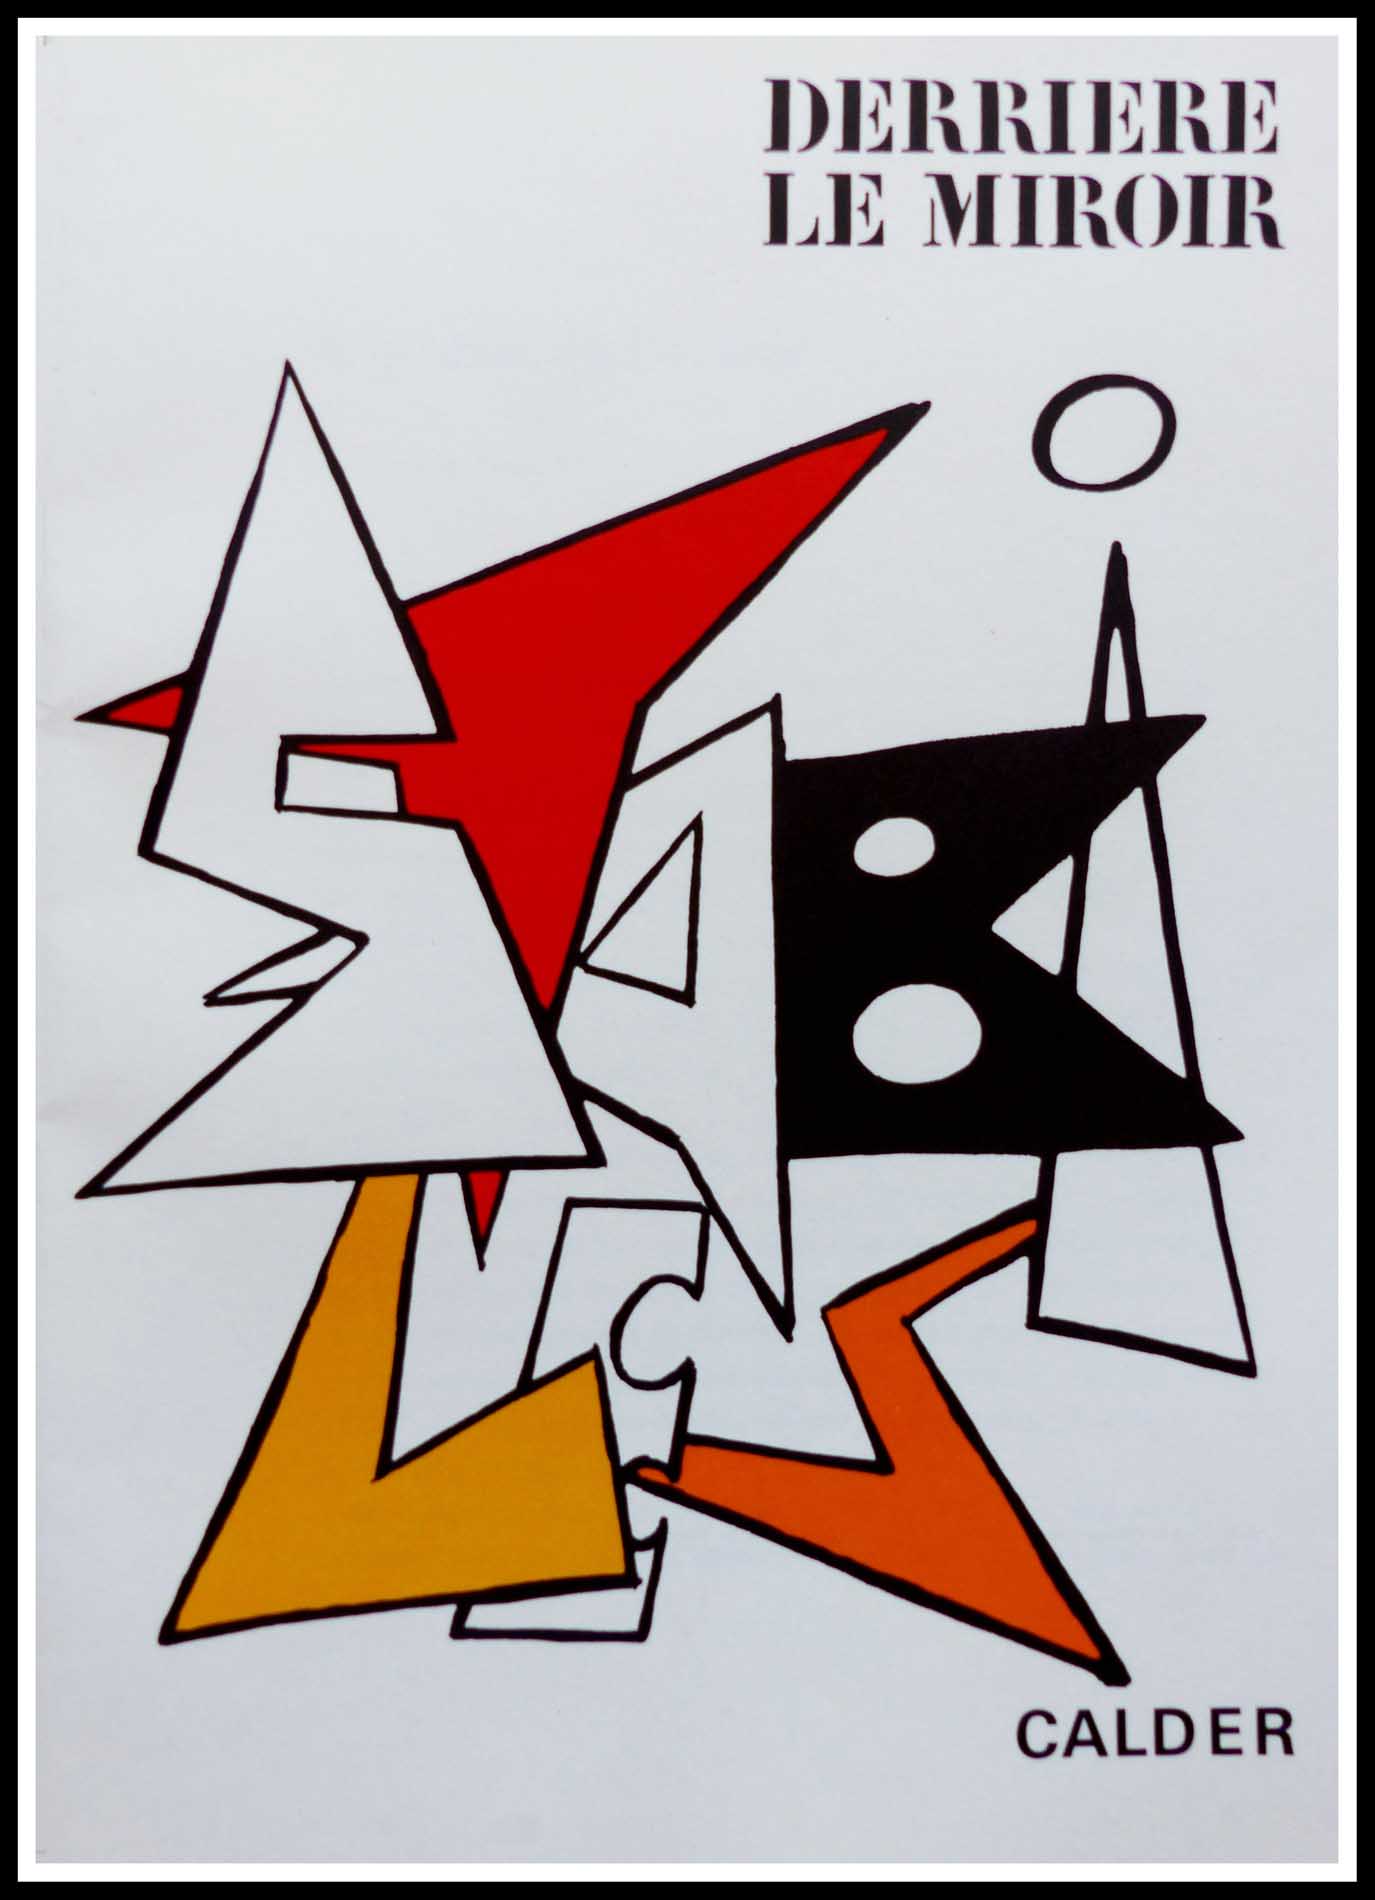 CALDER 38 x 28 cm exhibition Galerie Maeght Stabiles 1963 printed by ARTE condition A+